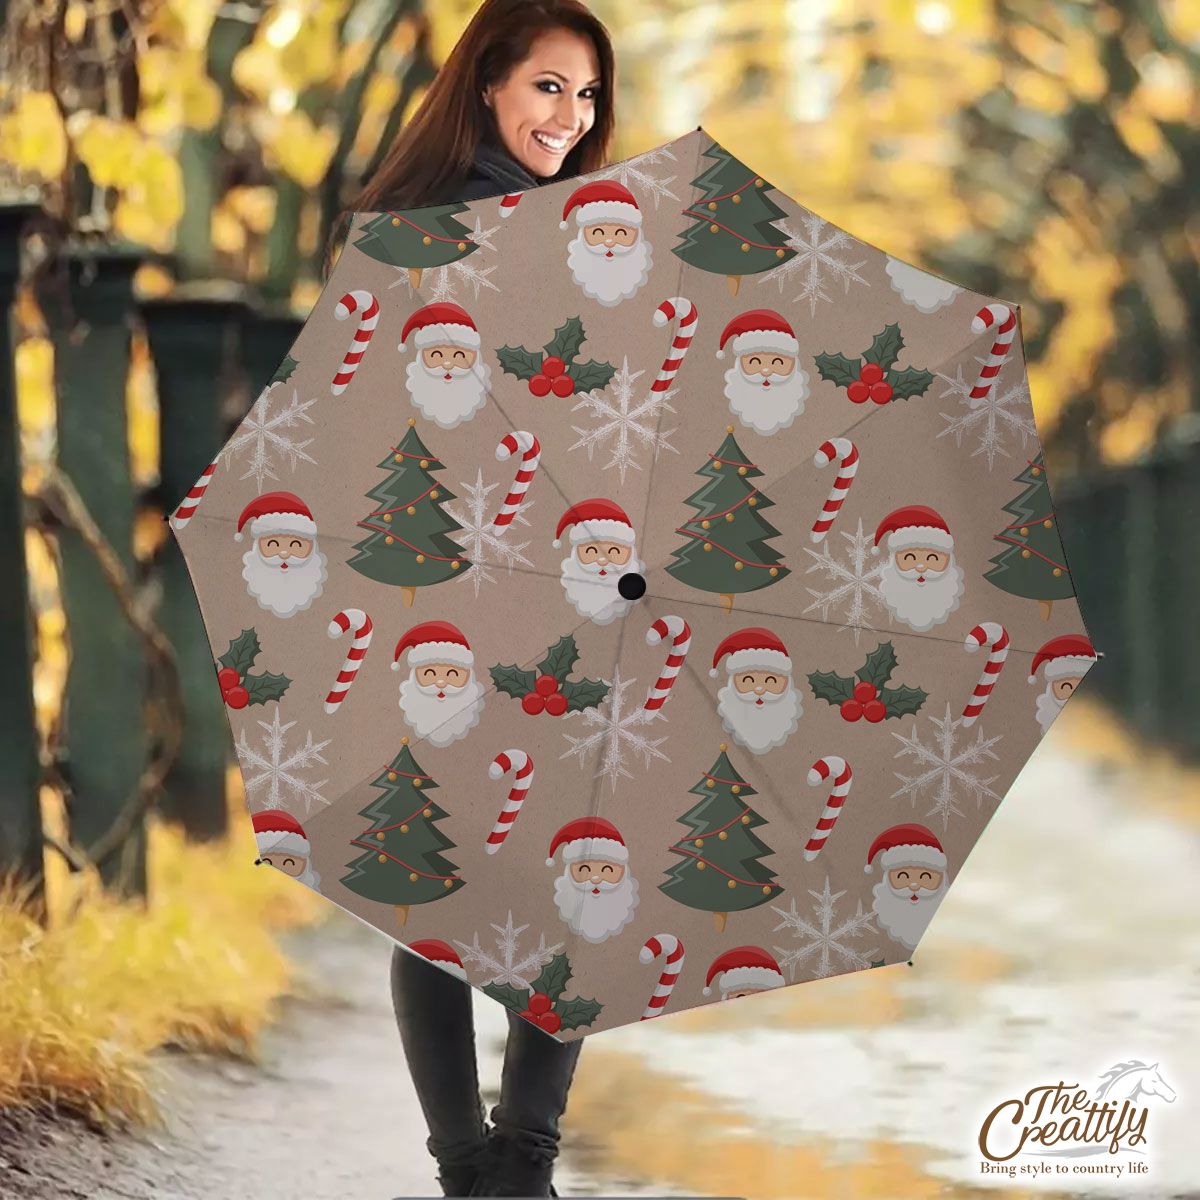 Santa Clause, Christmas Tree, Candy Cane, Holly Leaf On Snowflake Background Umbrella